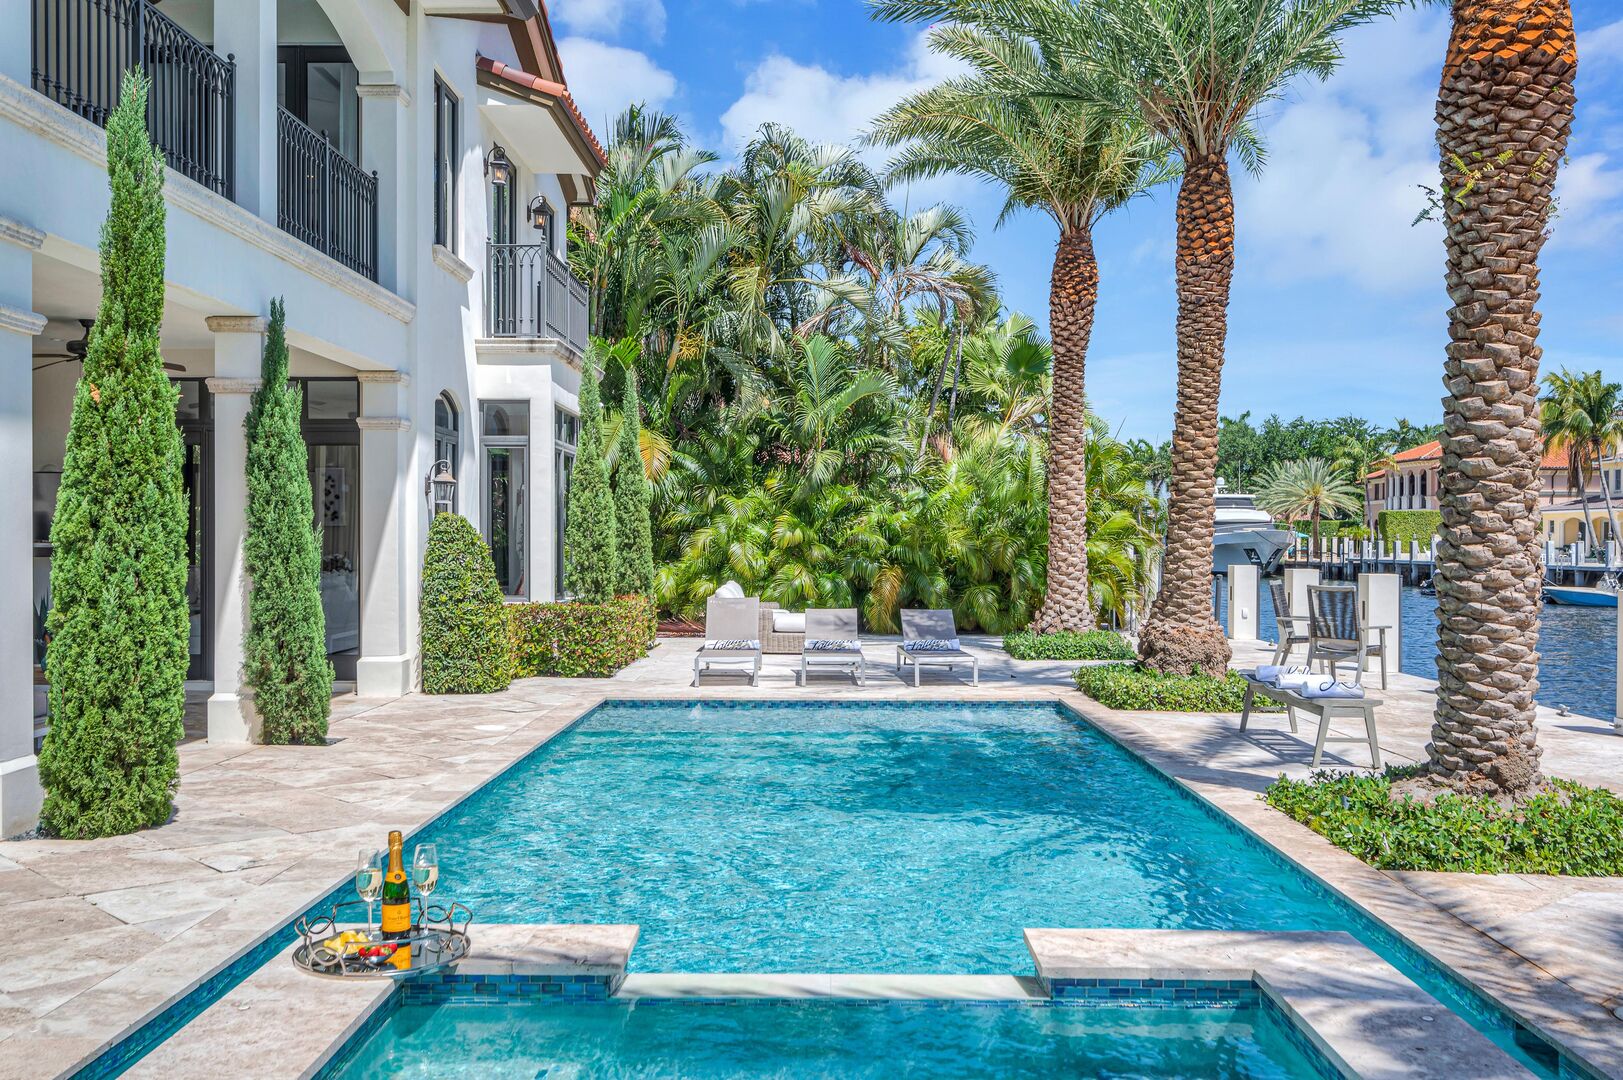 Delight in waterfront tranquility from the heated pool, hot tub and three lounge areas.